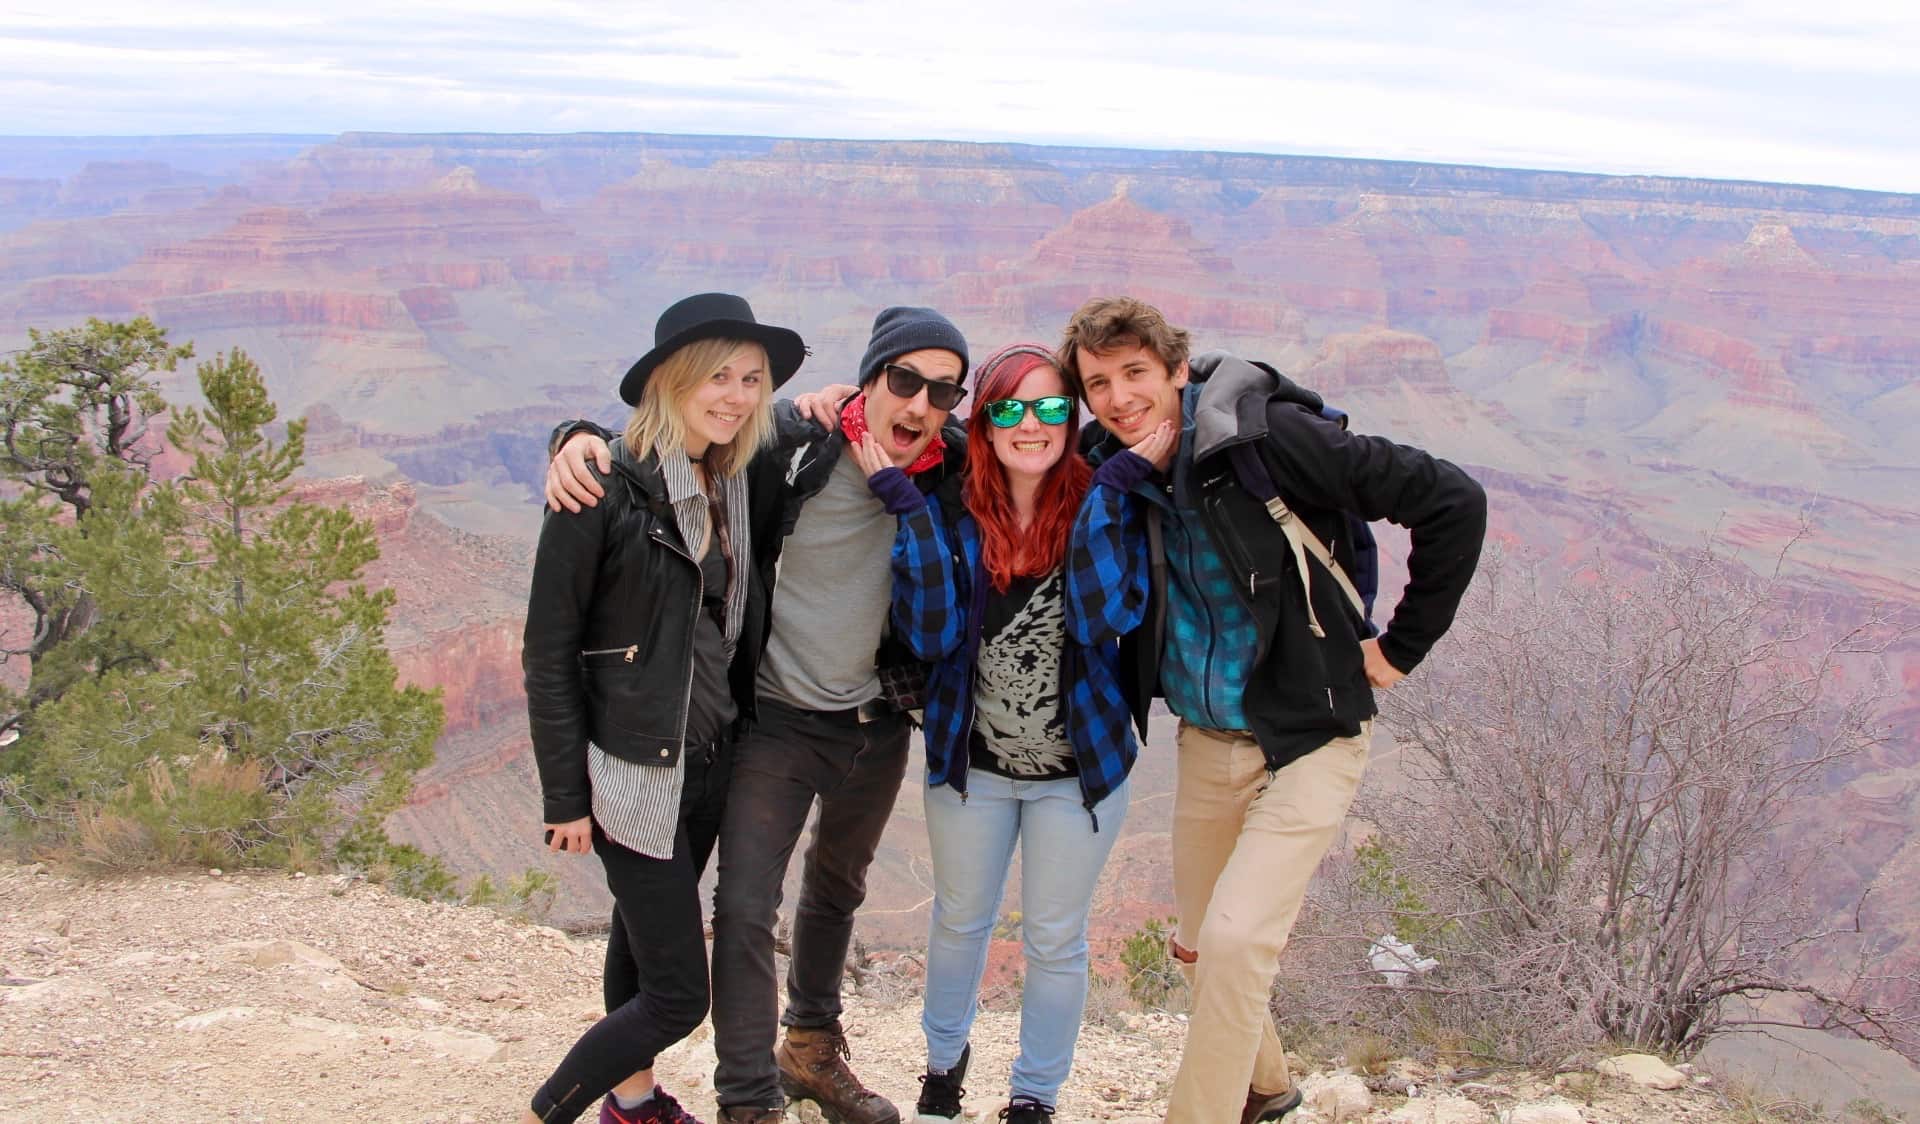 A group of travelers posing for a photo at the Grand Canyon in the USA